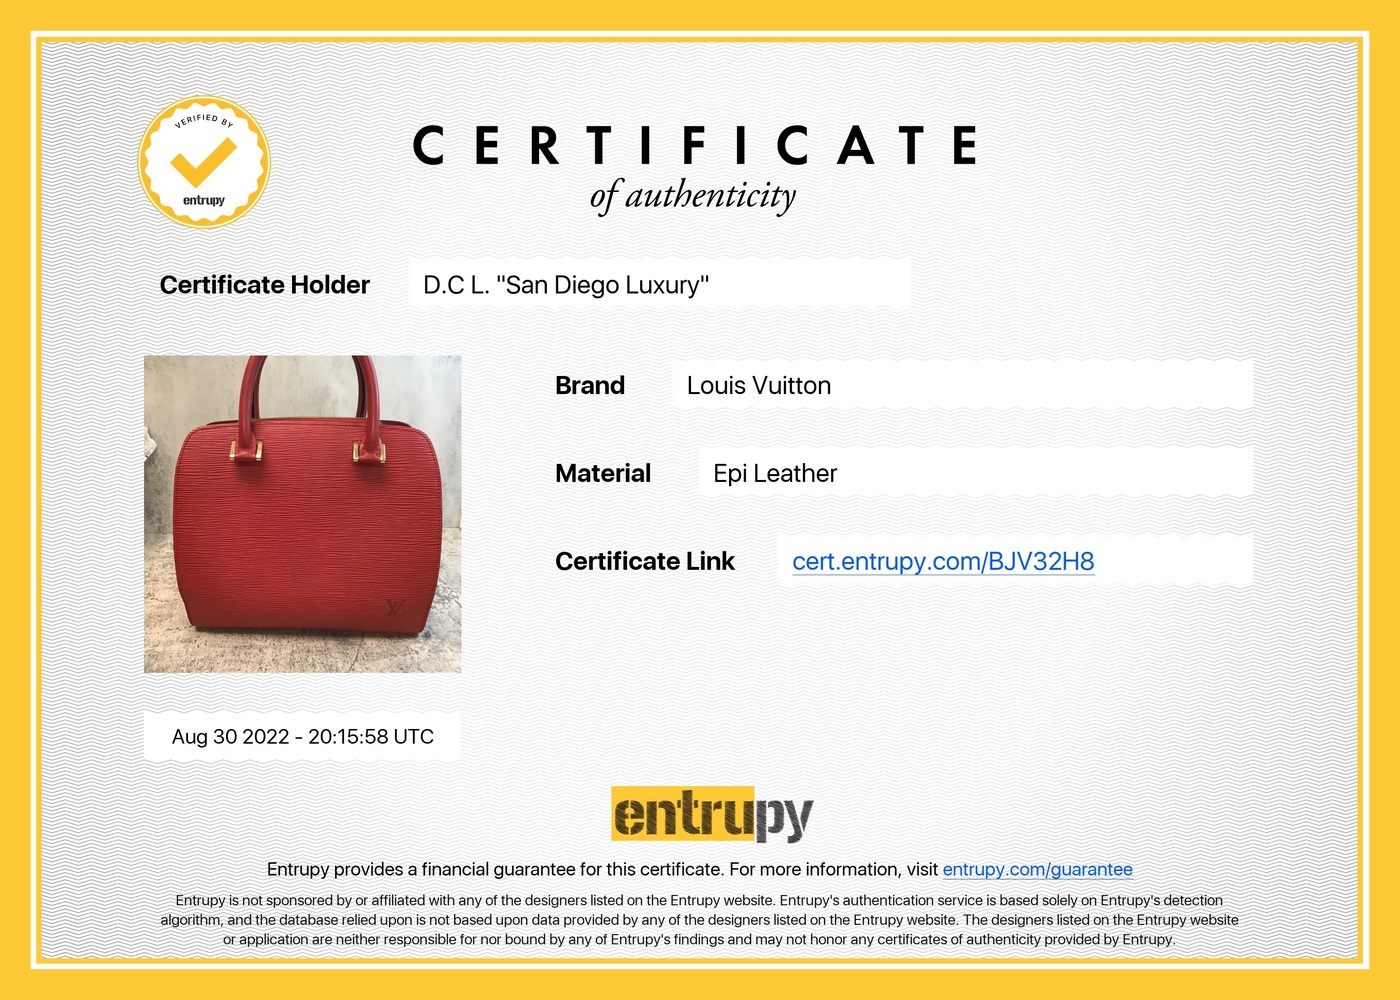 Louis Vuitton Pont Neuf Epi Leather handbag in Red - Excellent Condition